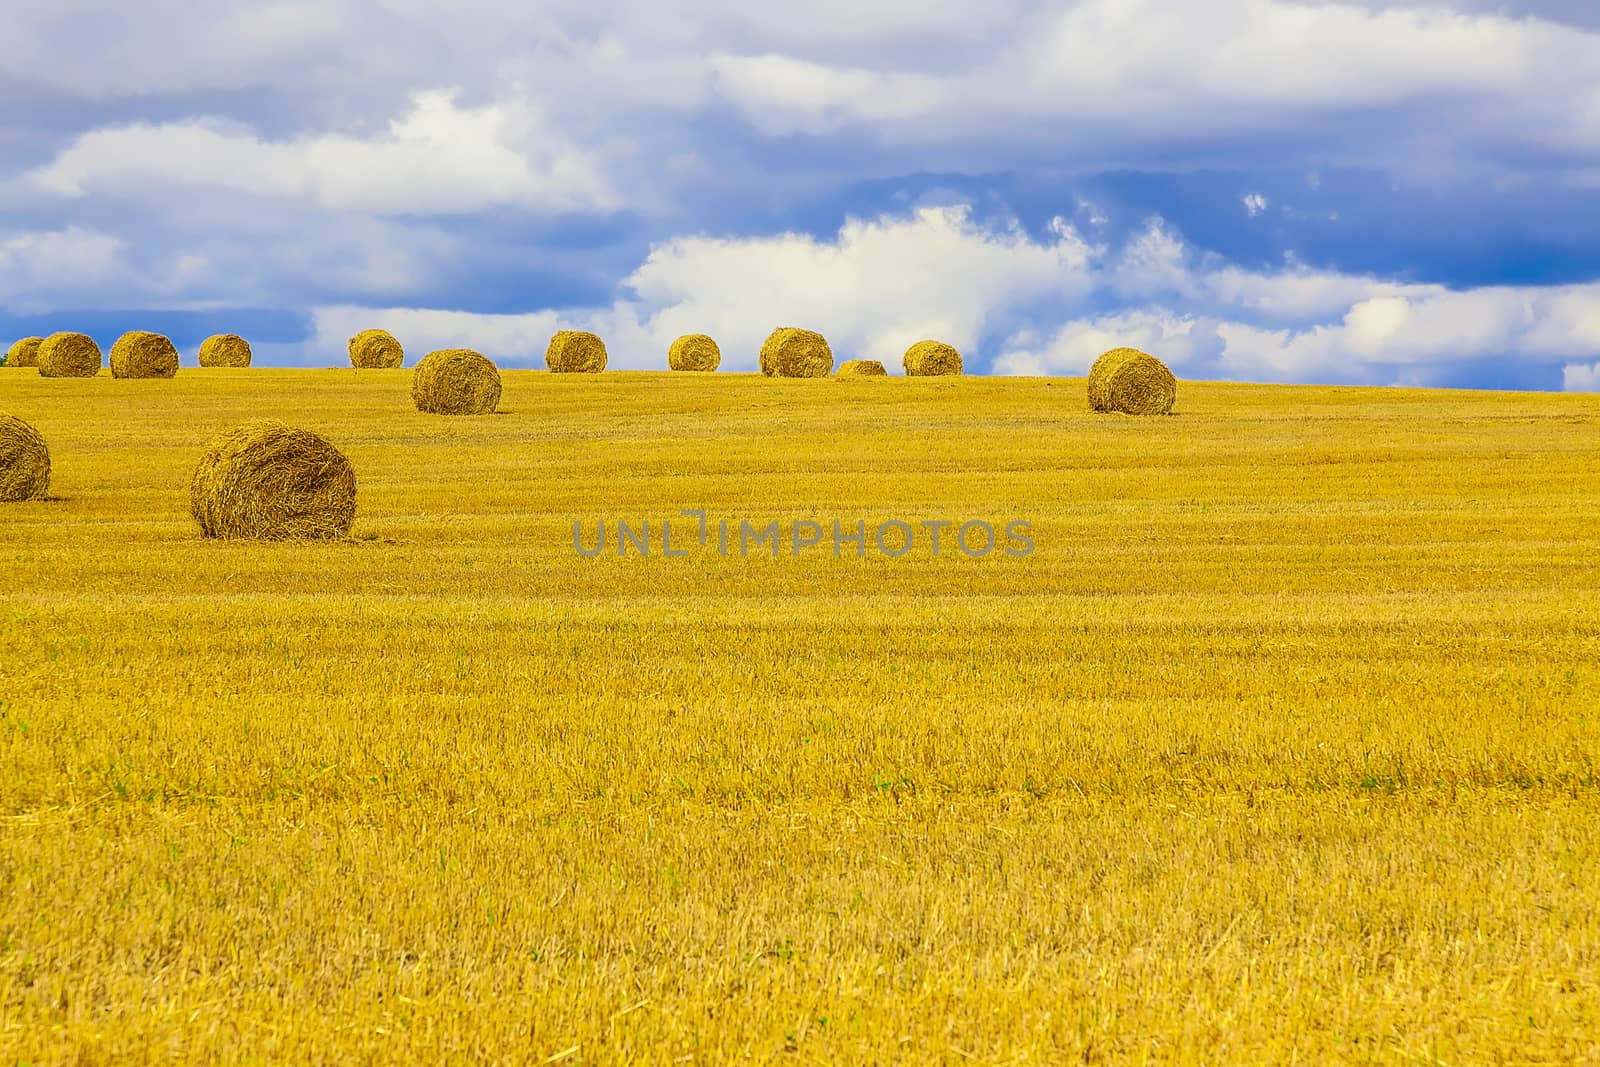 Yellow and Round Straw Bales in a Stubble Field at end of Summer at Day with Blue Sky and Clouds after Harvest